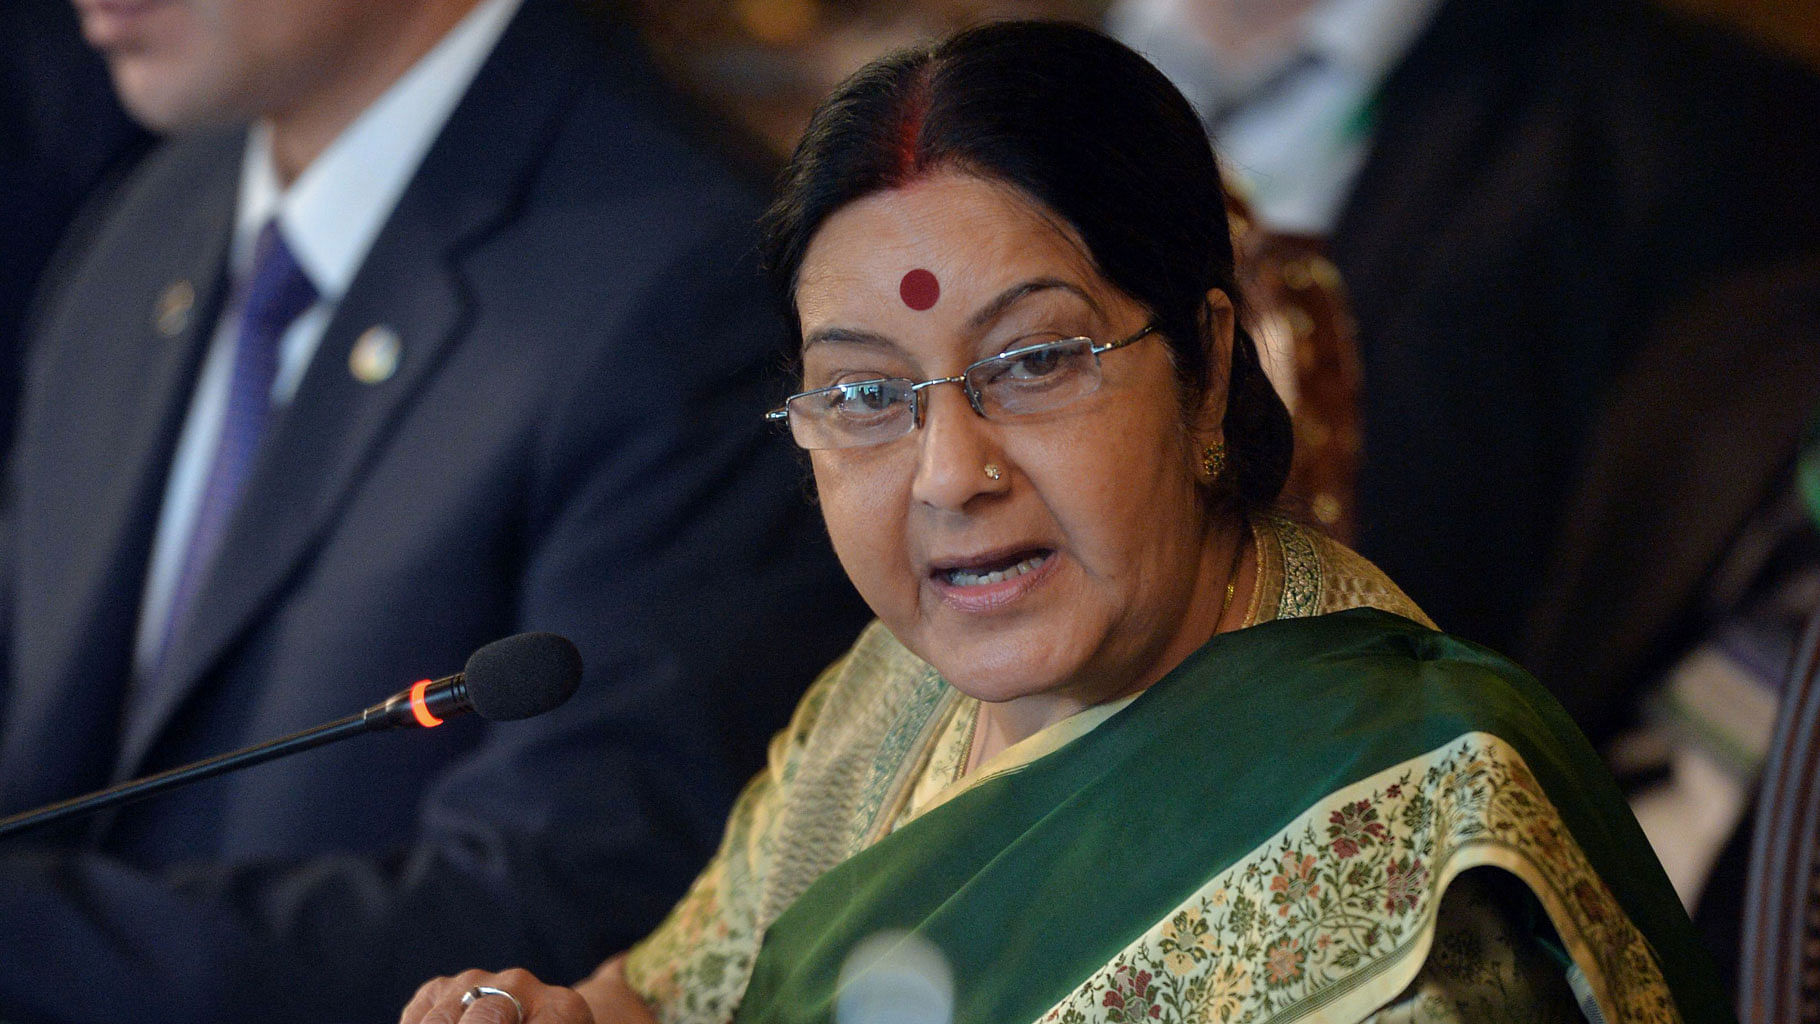 External Affairs Minister Sushma Swaraj has been subjected to online hate recently.